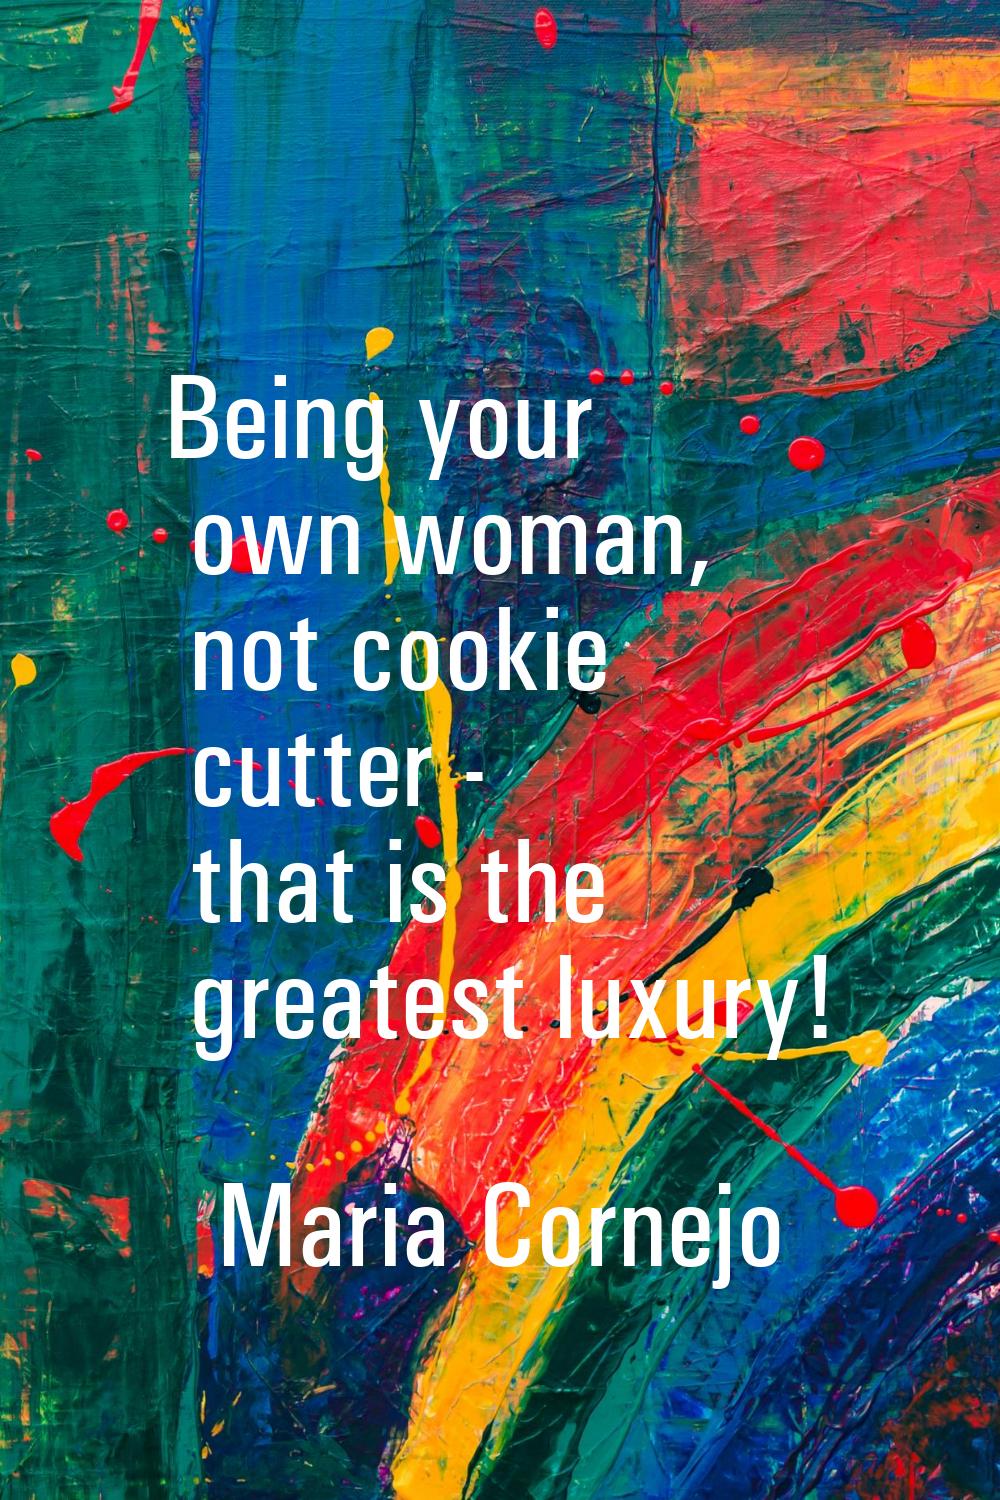 Being your own woman, not cookie cutter - that is the greatest luxury!